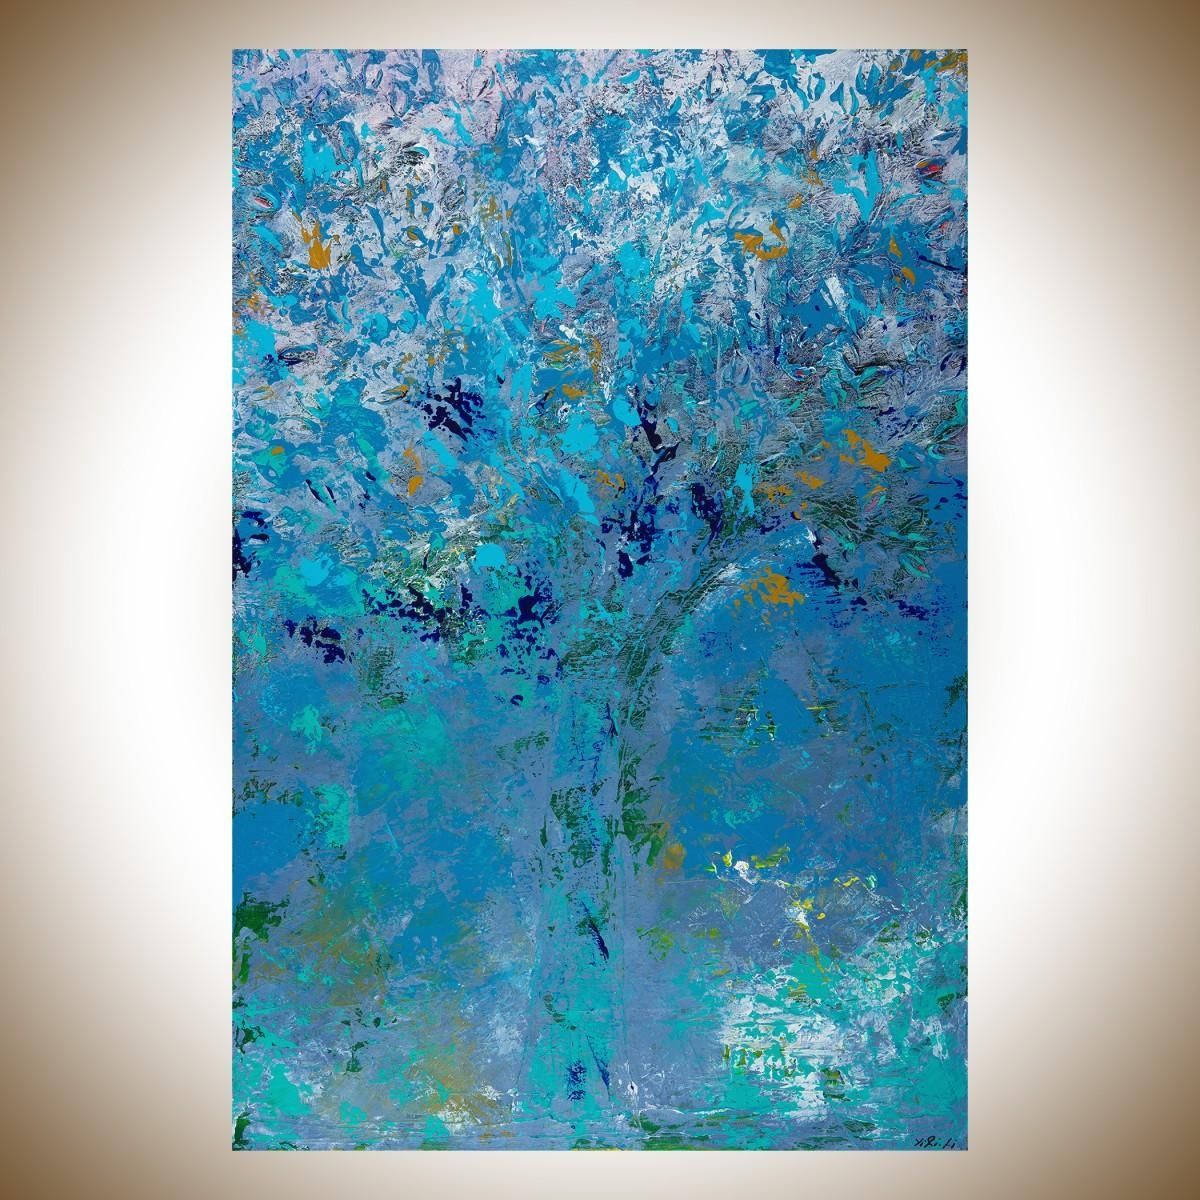 First Snowfallqiqigallery 36"x24" Original Modern Contemporary Pertaining To Blue And White Wall Art (View 7 of 20)